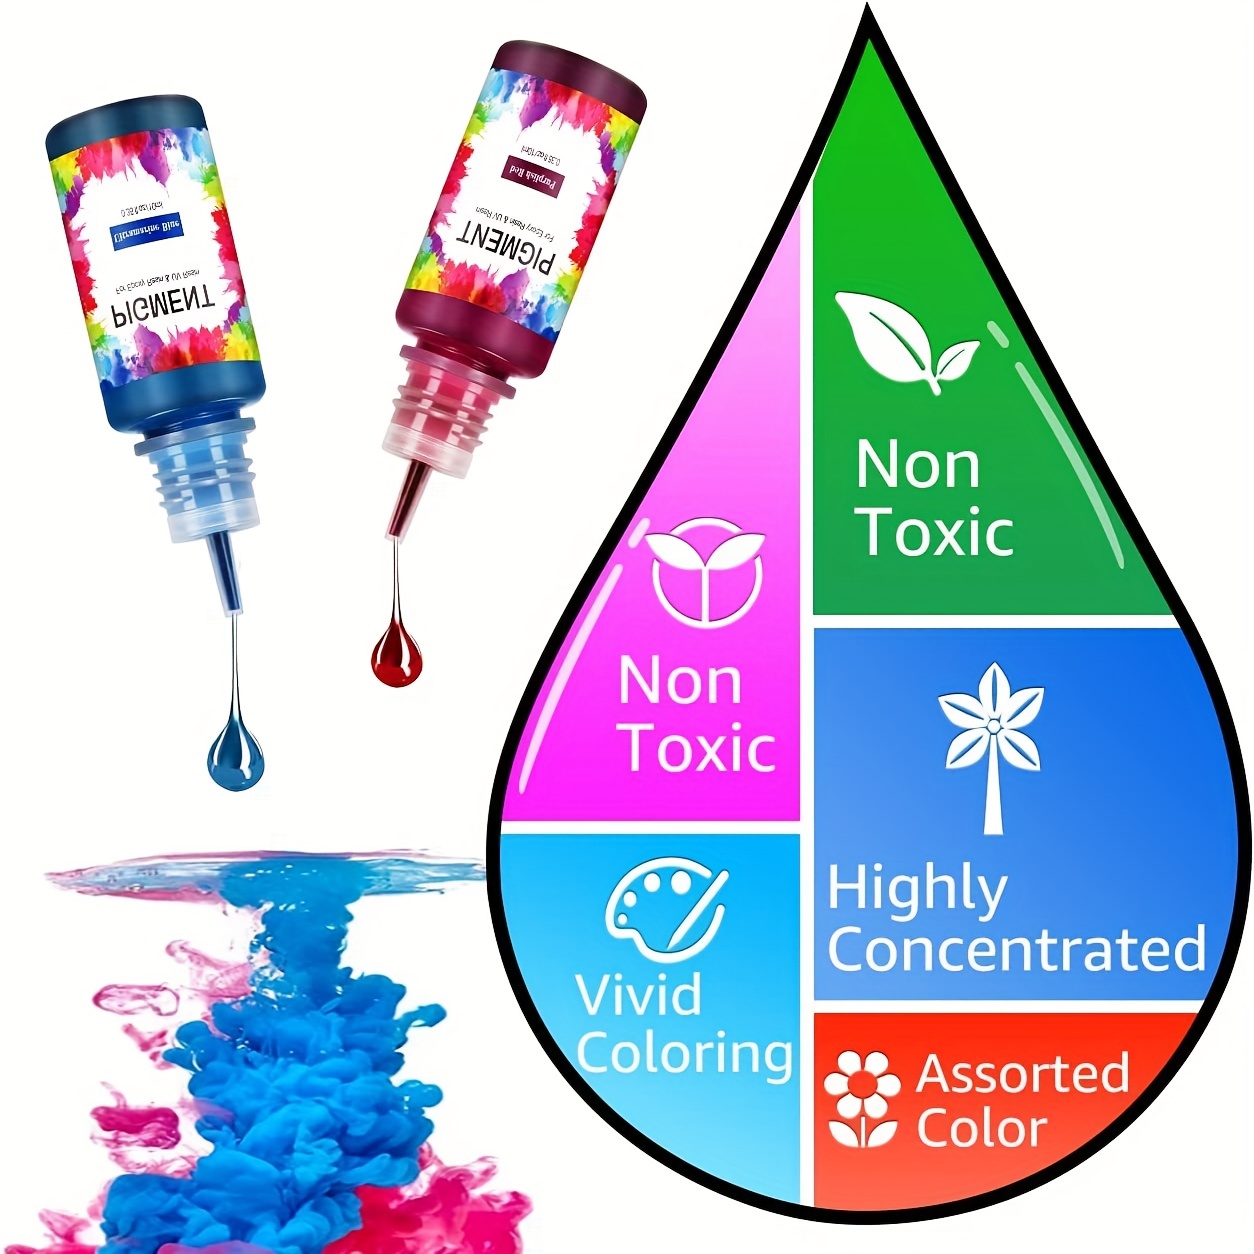 Epoxy Resin Pigment - 16 Color Liquid Translucent Epoxy Resin Colorant,  Highly Concentrated Epoxy Resin Dye for DIY Jewelry Making, AB Resin  Coloring for Paint, Craft - 10ml Each